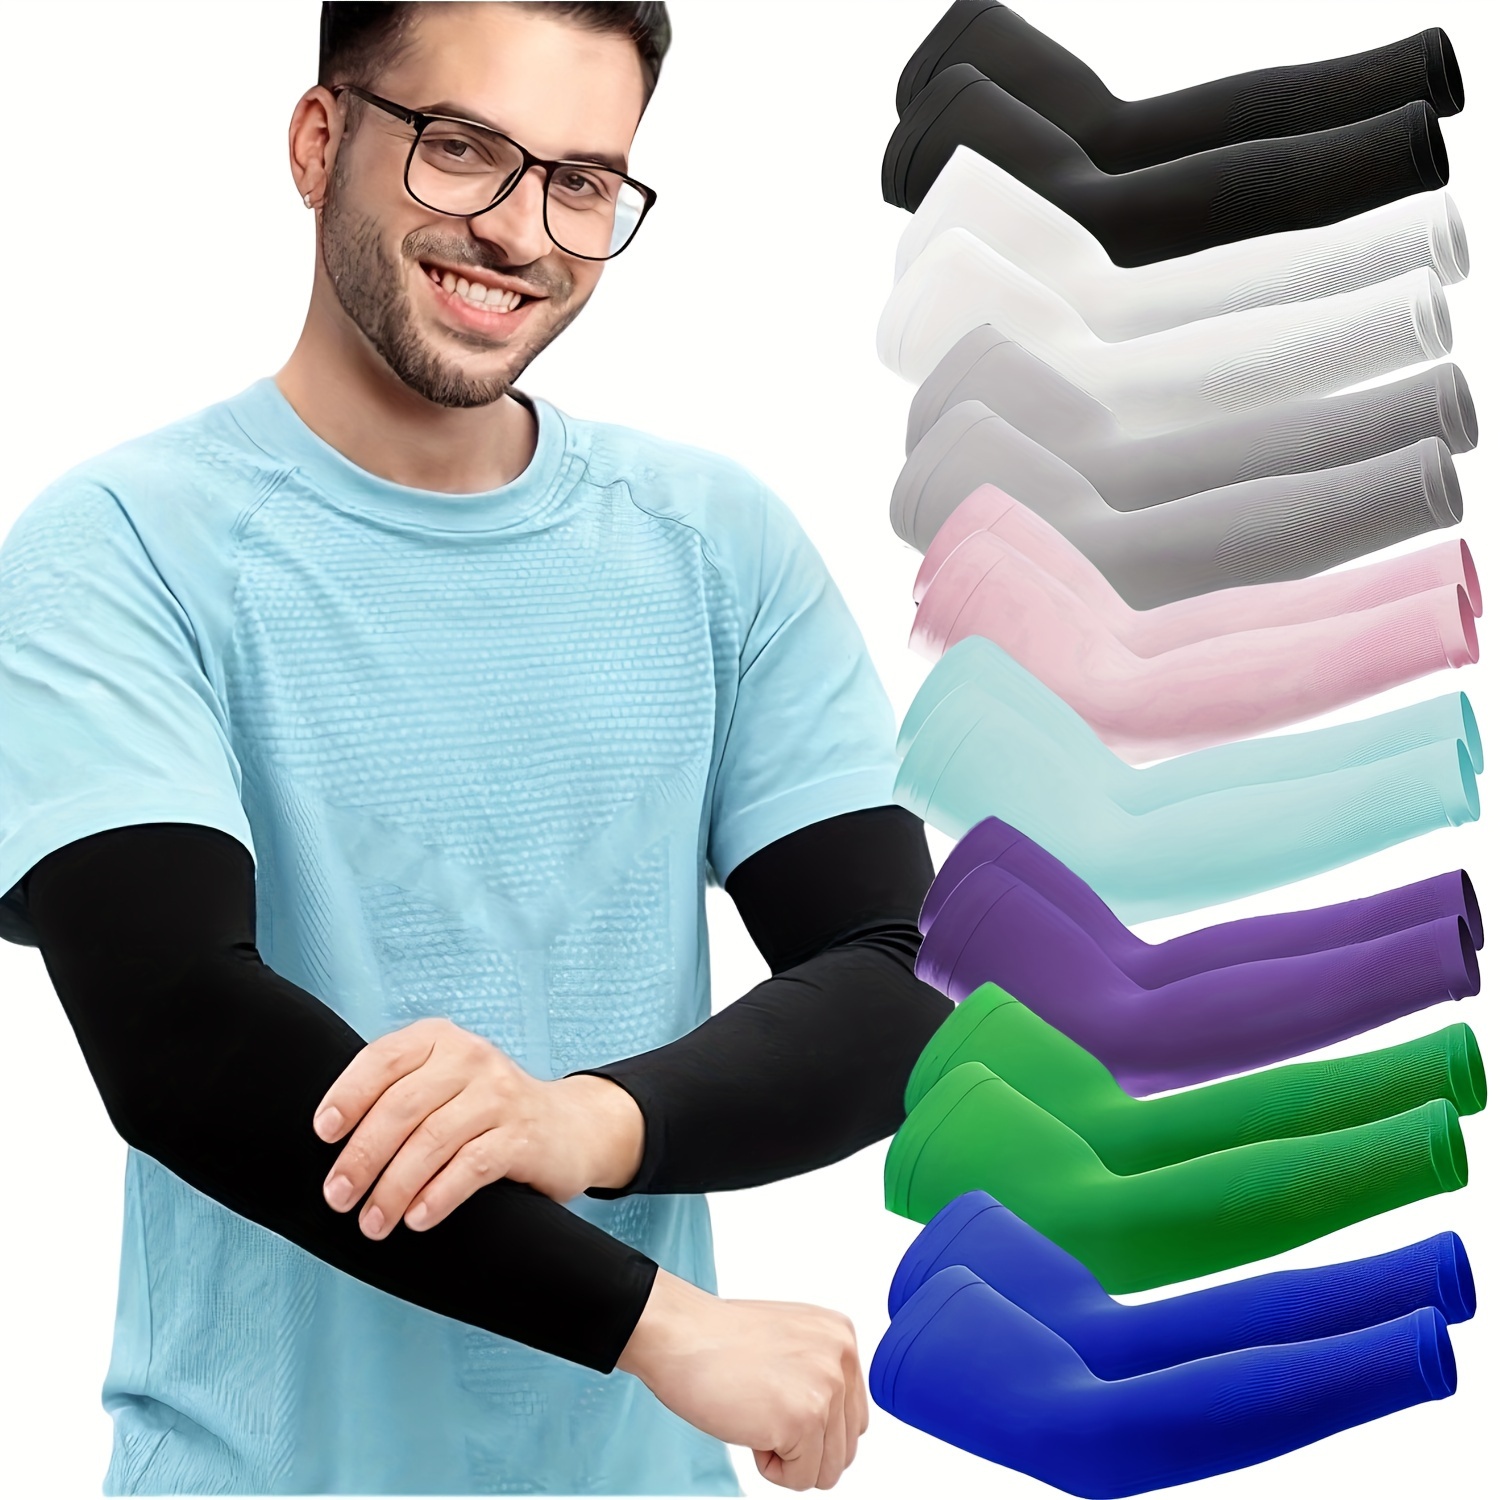 

4pairs Cooling Uv Protection Colorful Arm Sleeves, For Men Women Outdoor Sports, Fishing, Golf